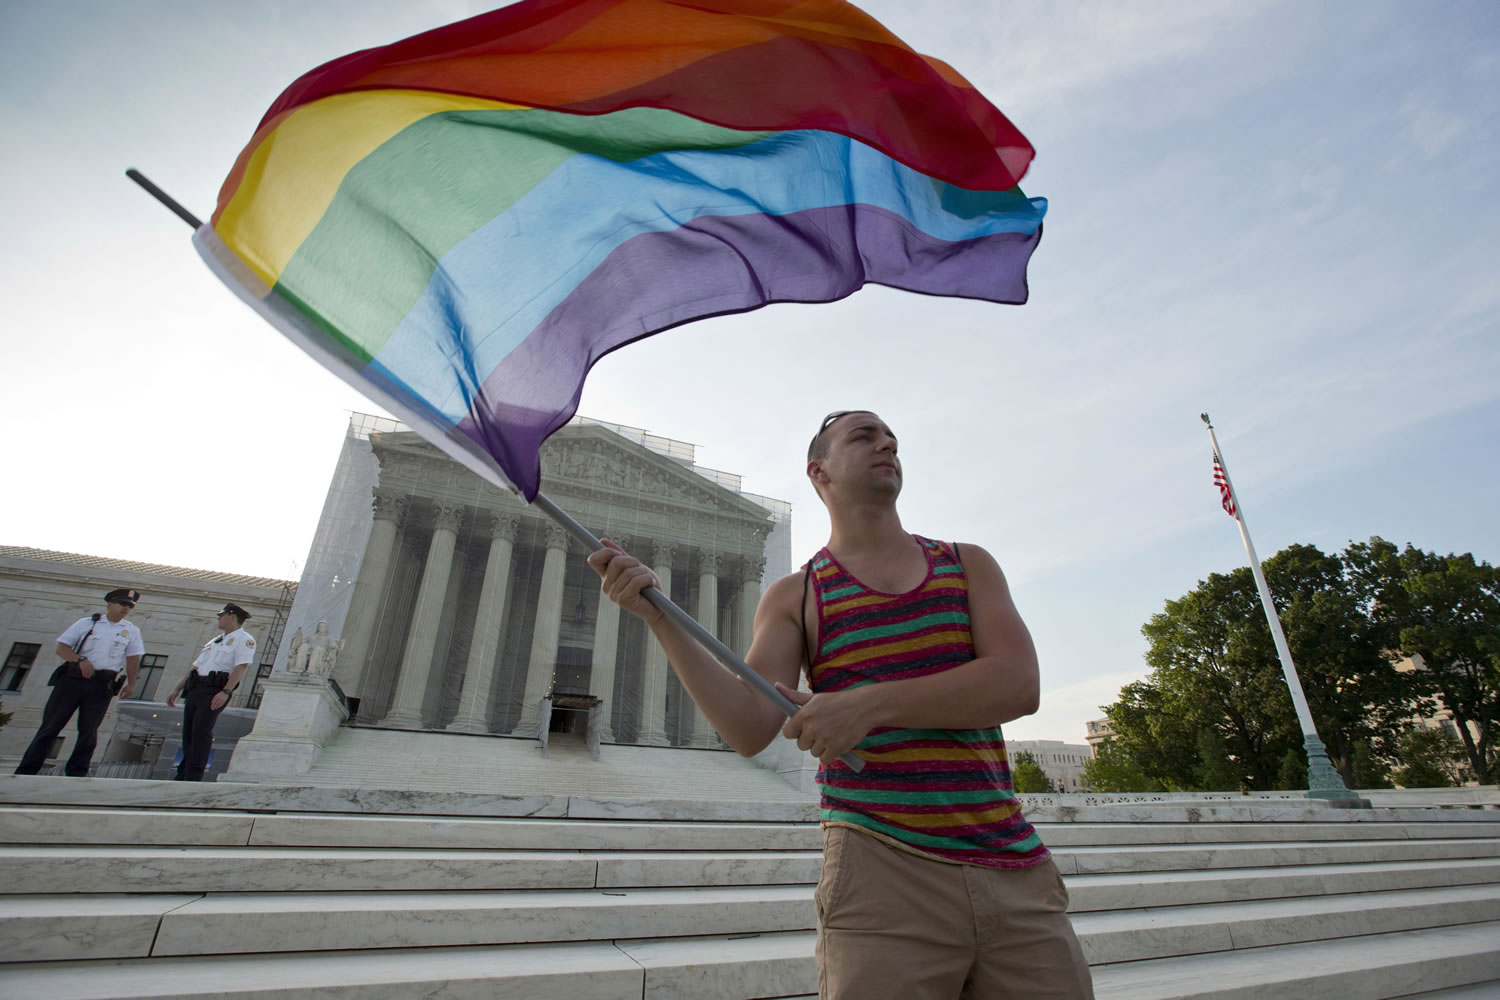 Gay rights advocate Vin Testa waves a rainbow flag June 26, 2013 in front of the Supreme Court in Washington. Both sides in the gay marriage debate agree on one thing: It's time for the Supreme Court to settle the matter.